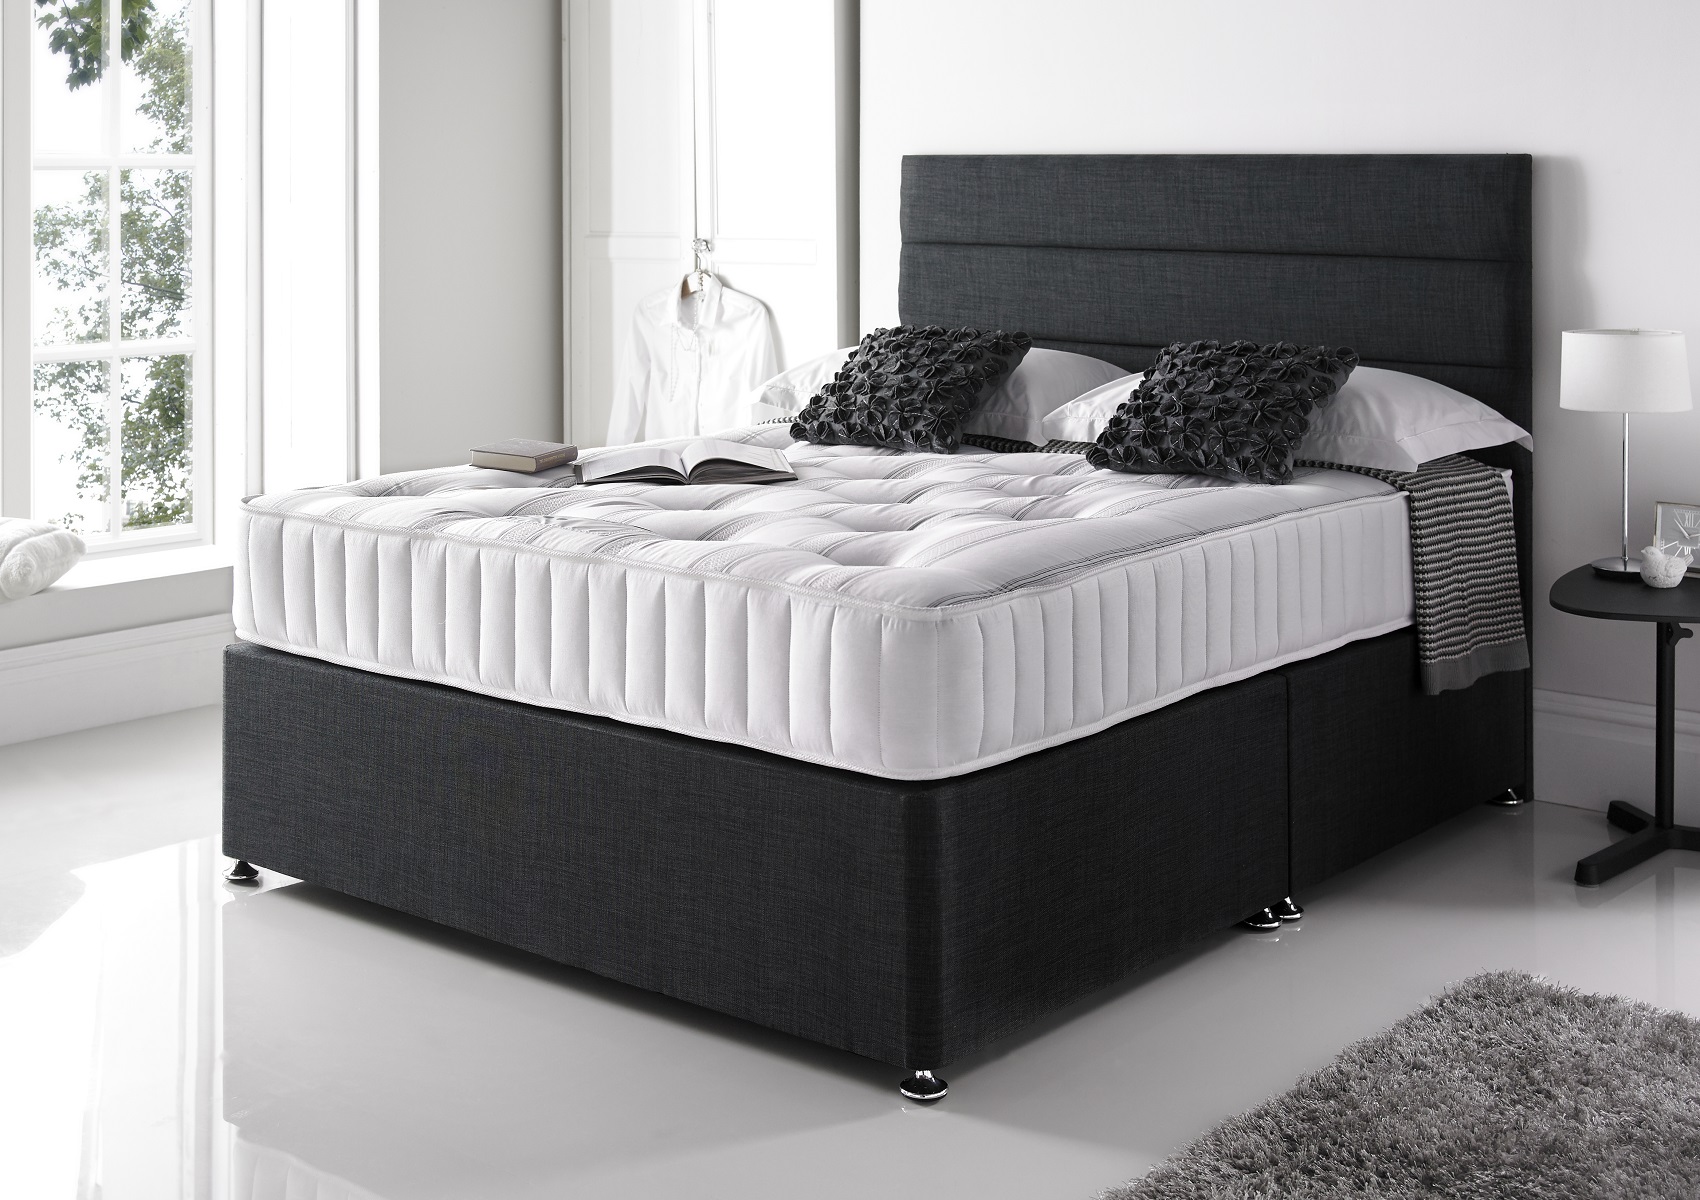 View Essentials Charcoal Upholstered Double Divan Bed Time4Sleep information